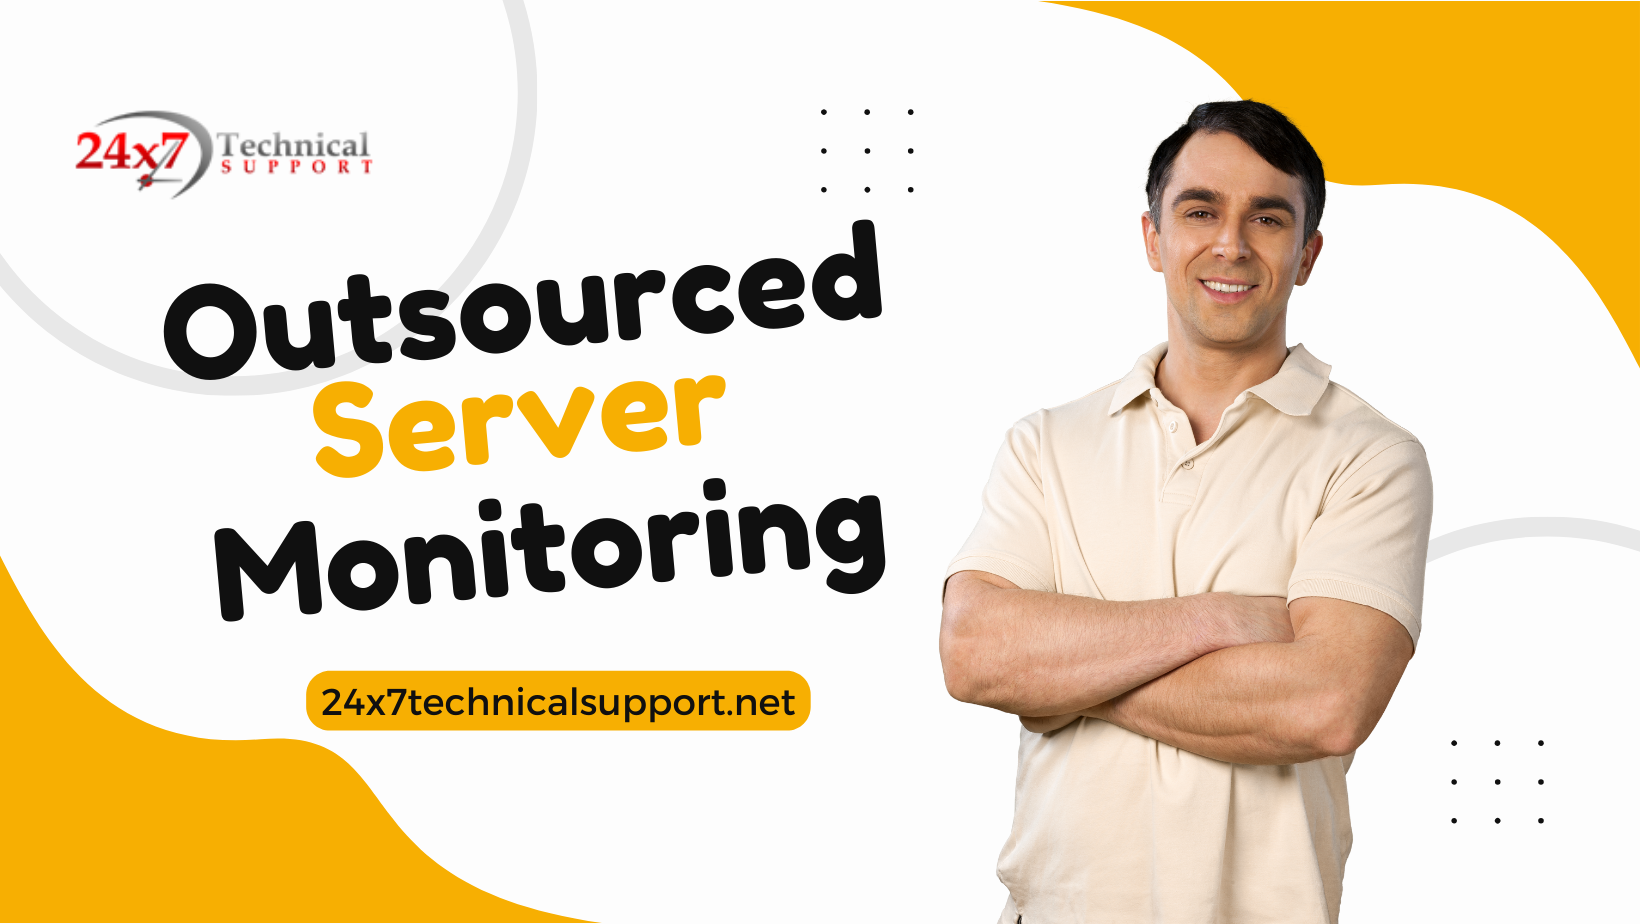 Outsourced server monitoring